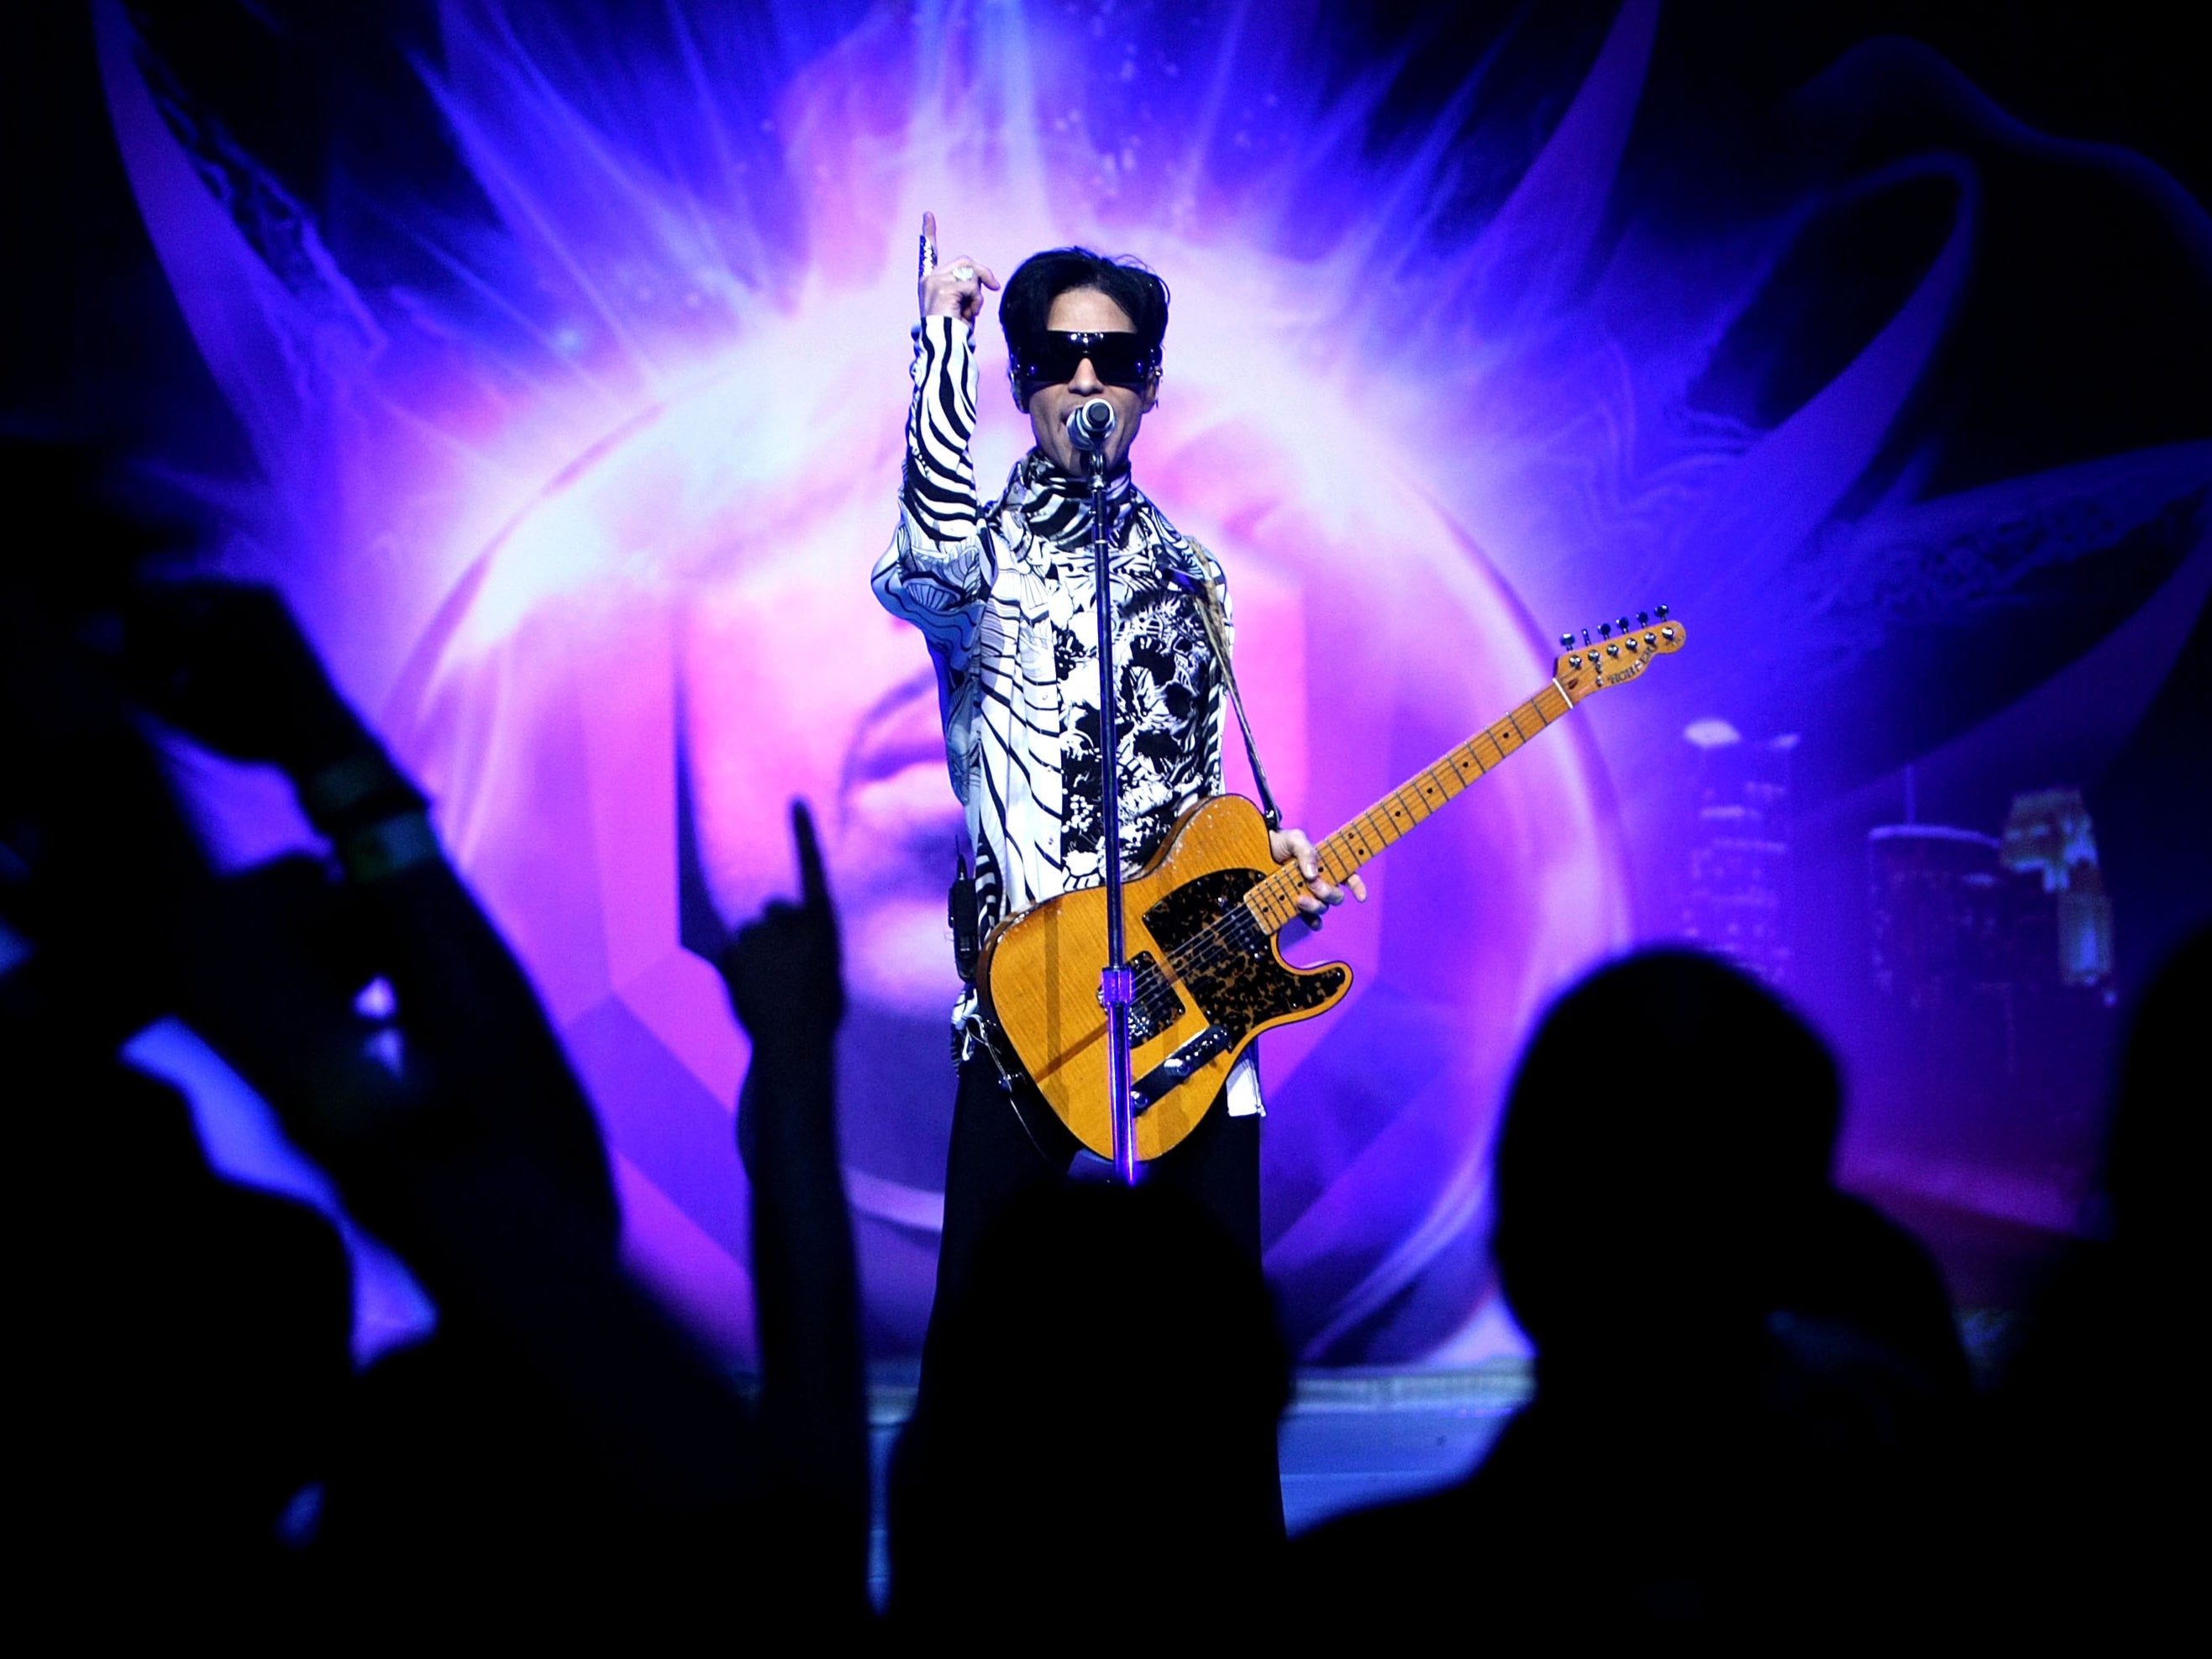 Prince performing in 2009